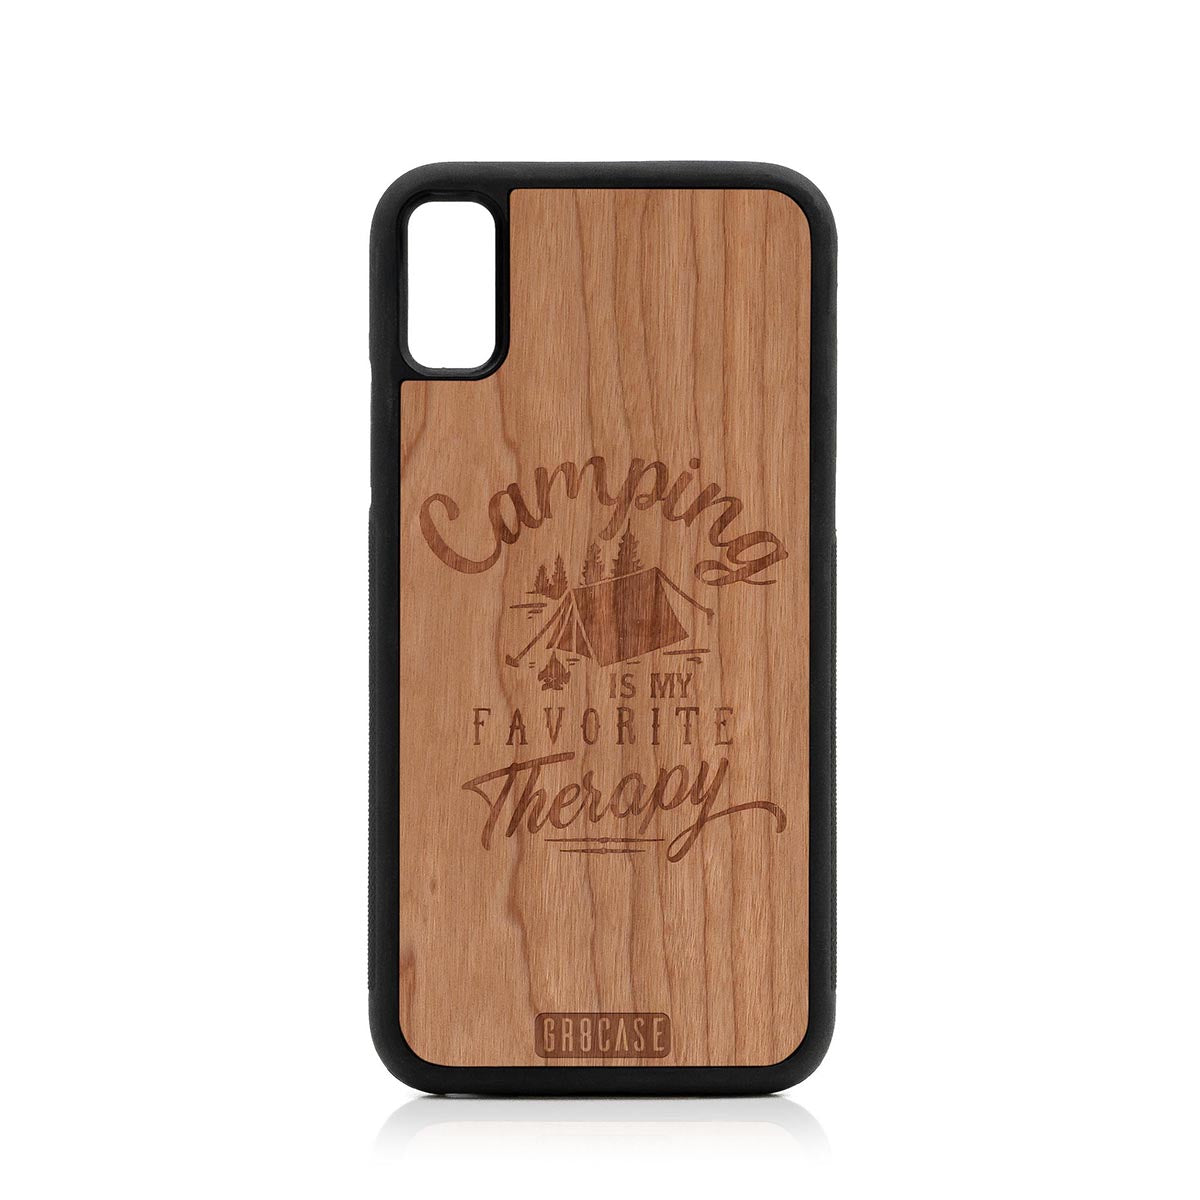 Camping Is My Favorite Therapy Design Wood Case For iPhone XR by GR8CASE